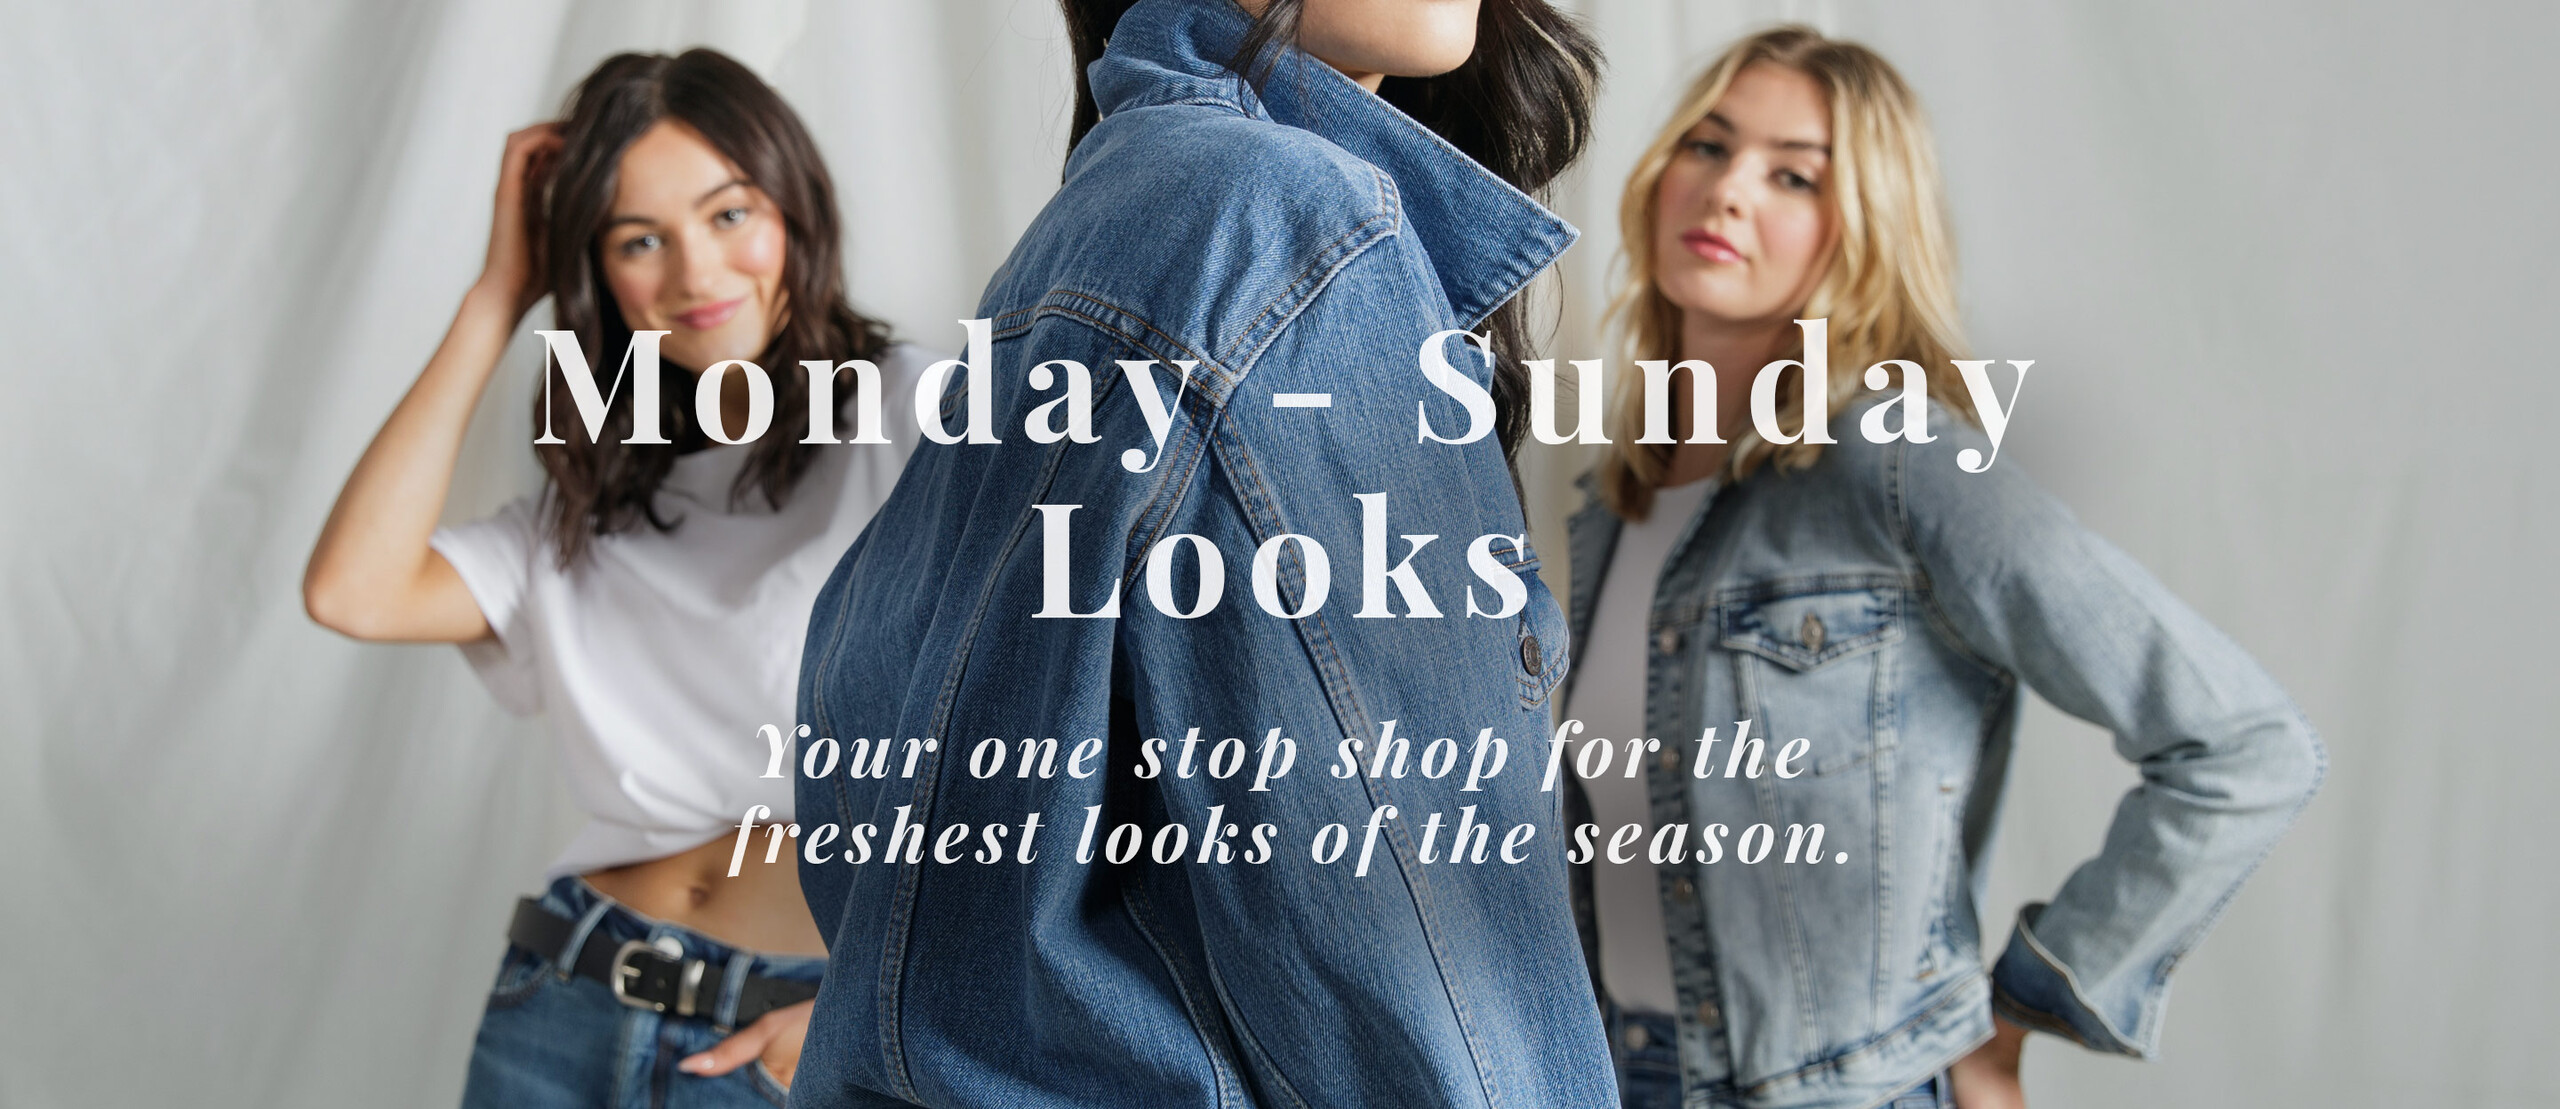 Monday - Sunday Looks  Your one stop shop for the freshest looks of the season. New women's New Men's